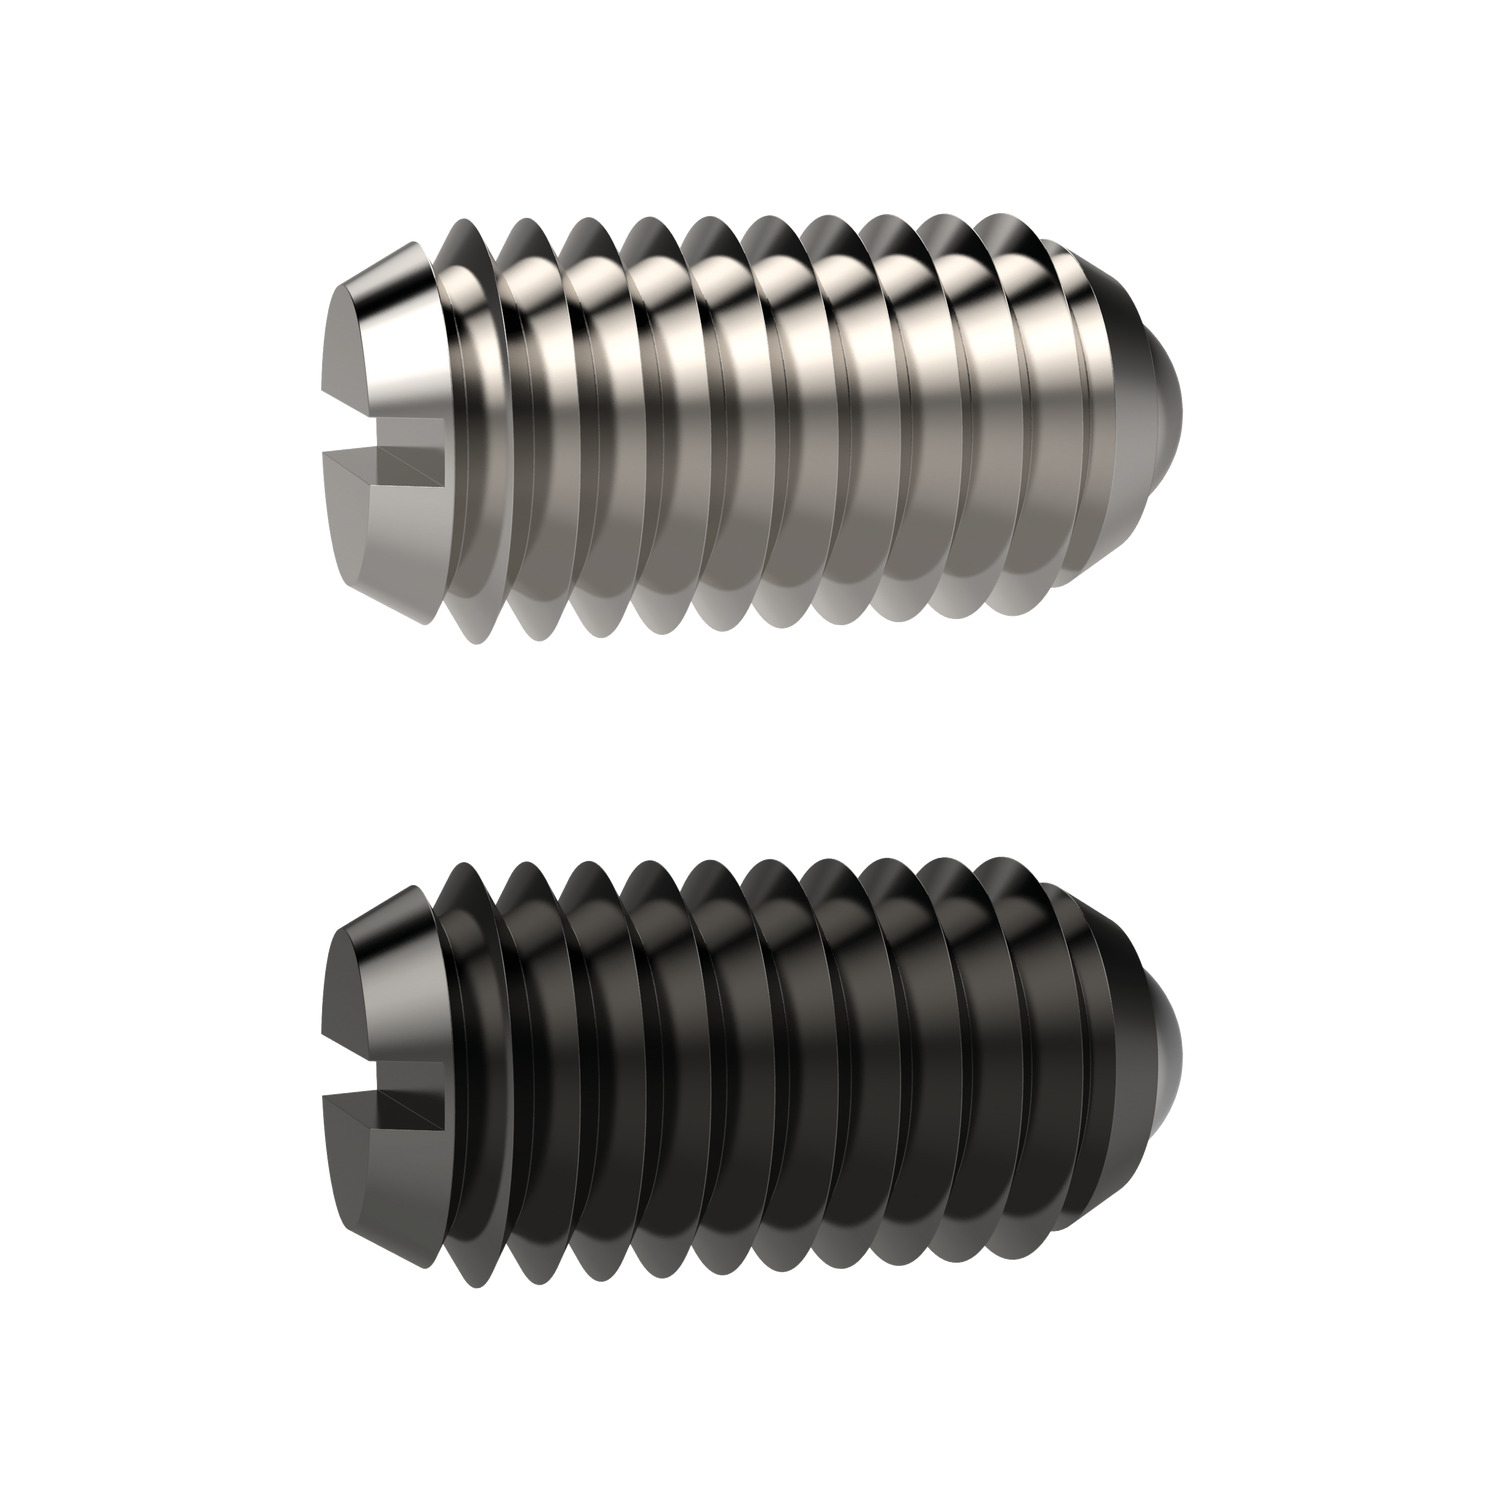 Spring Plungers A ball end and slot spring plunger manufactured in steel and stainless steel with sizes starting from M2 up to M24. Increased spring strength variations are provided within the standard range